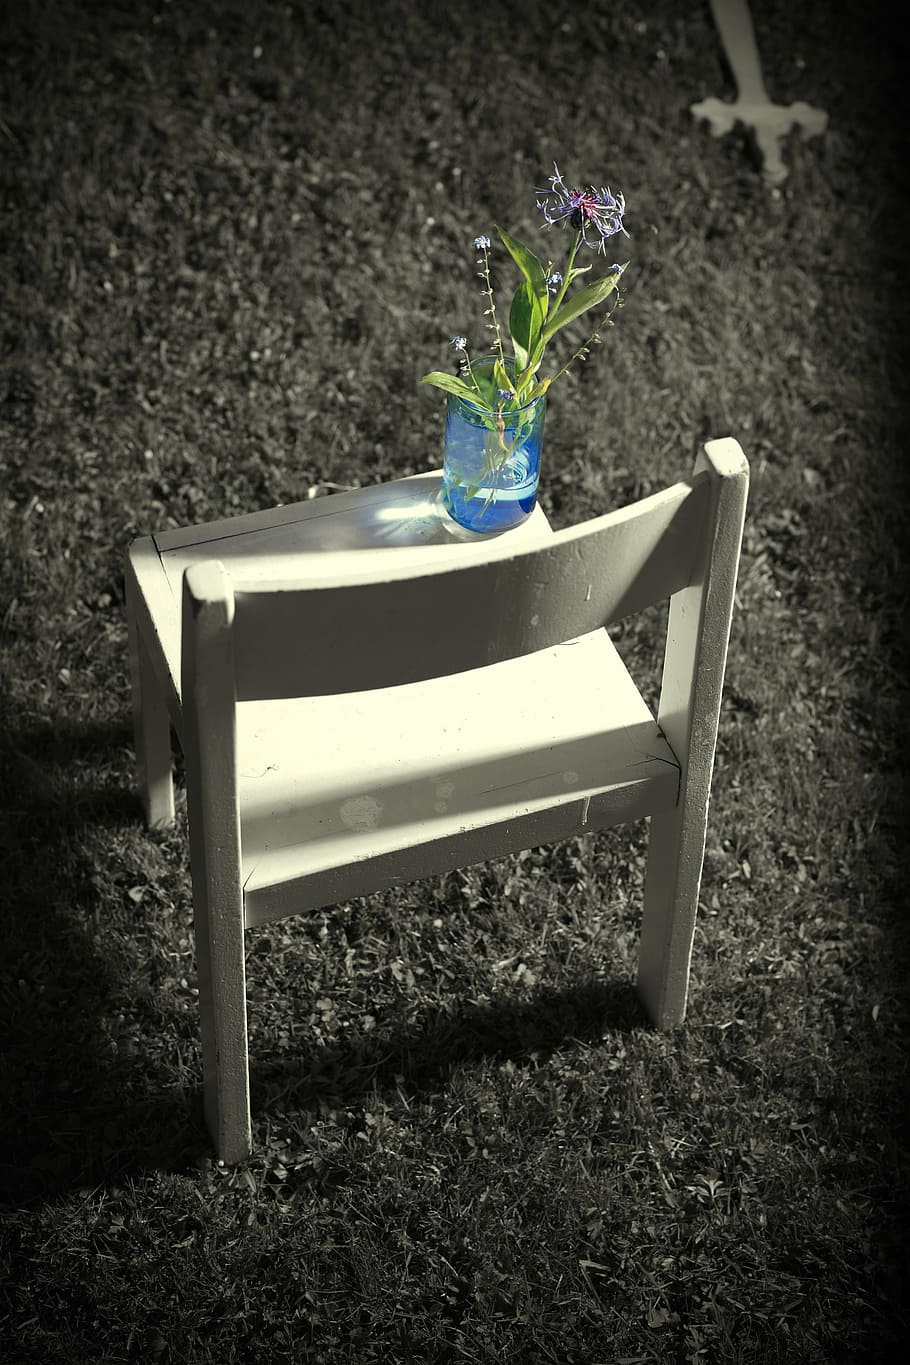 green plant in glass vase on chair, loss, sadness, pain, mourning